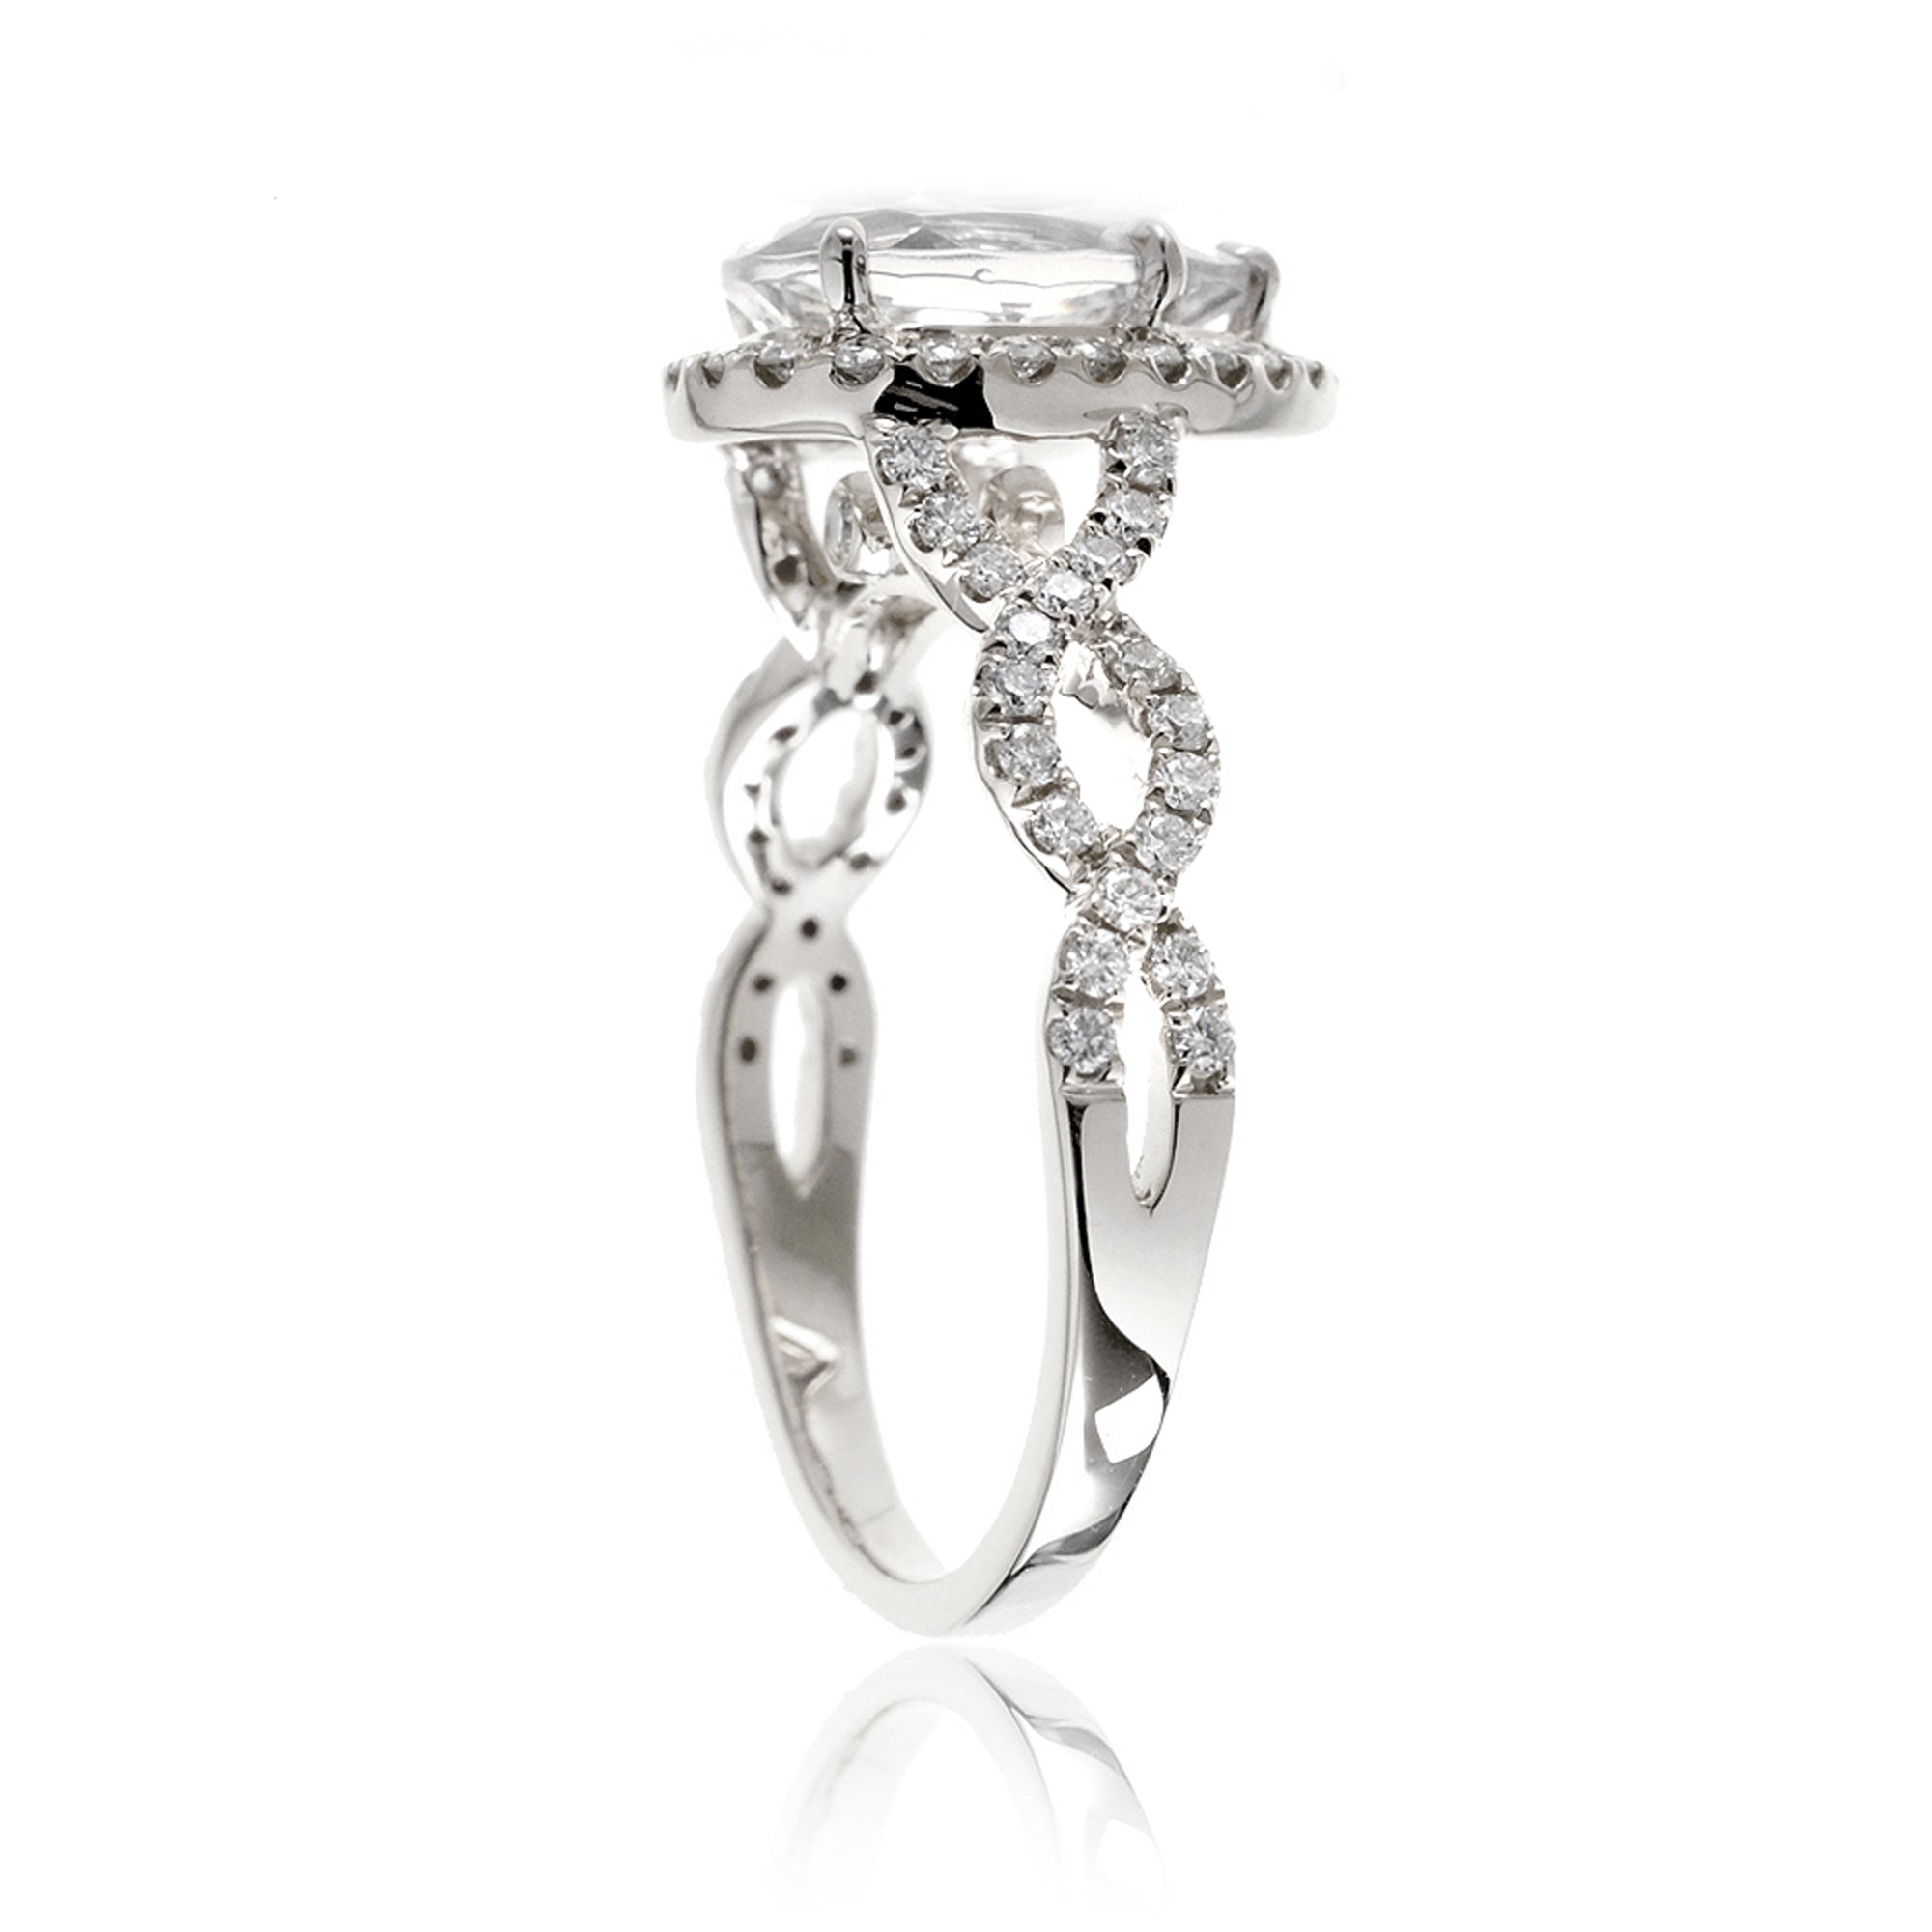 Pear diamond engagement ring halo and twist band white gold